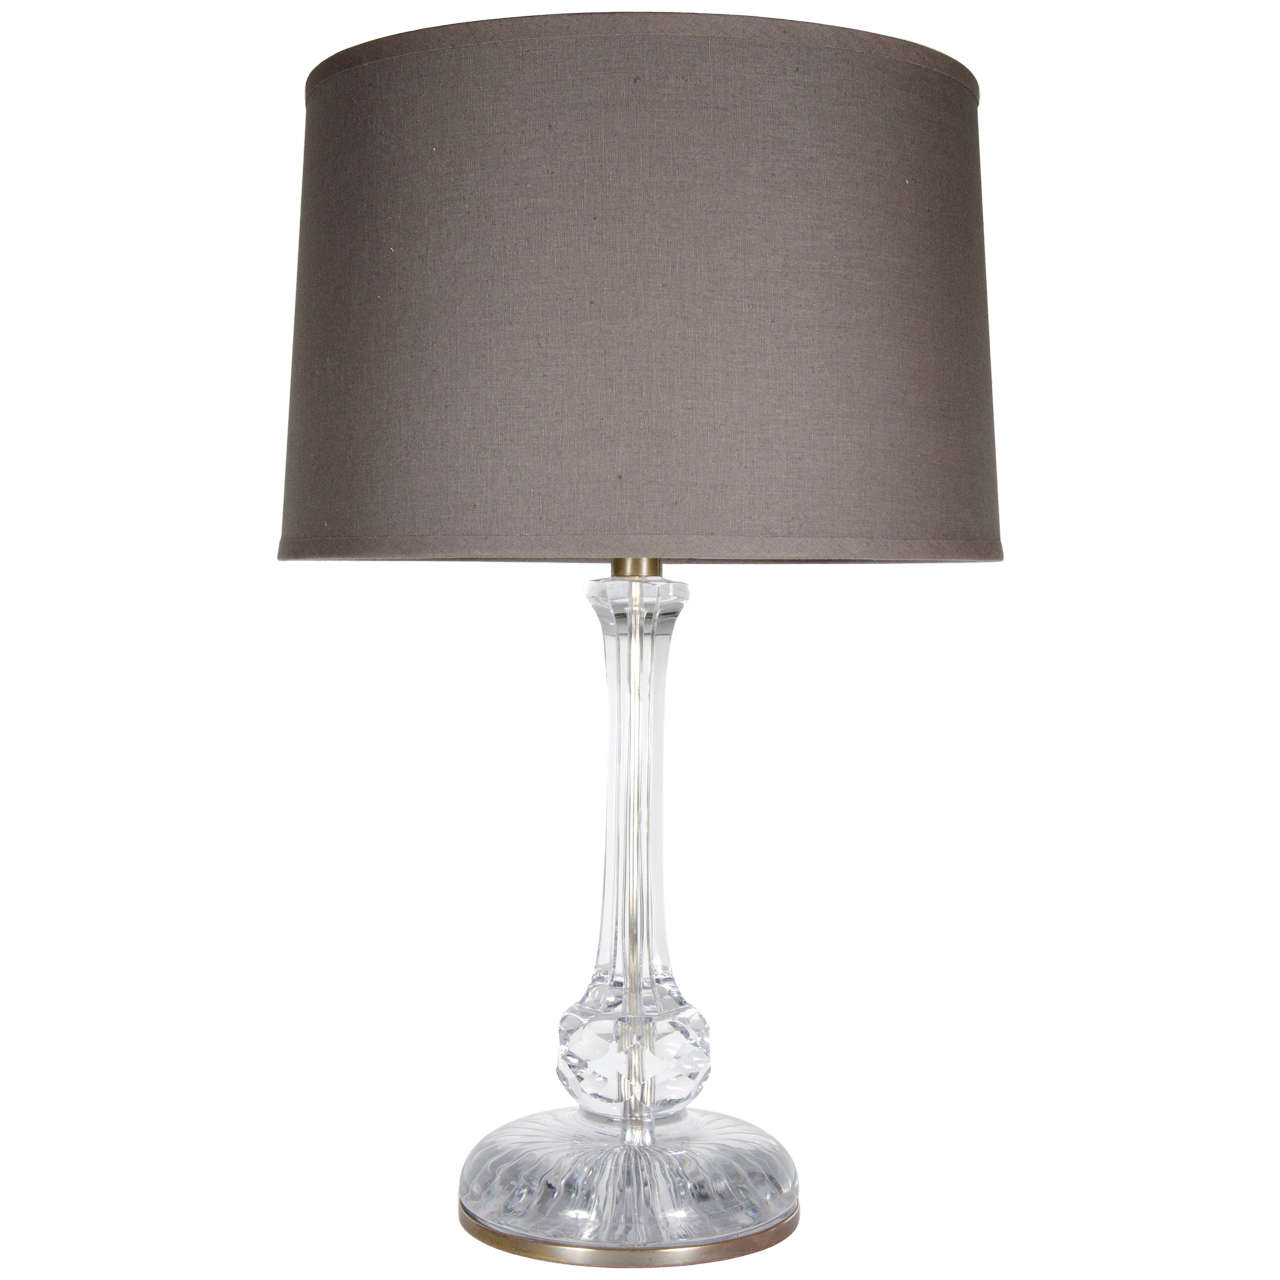 Exquisite Art Deco Crystal Table Lamp, Baccarat Crystal Table Lamps